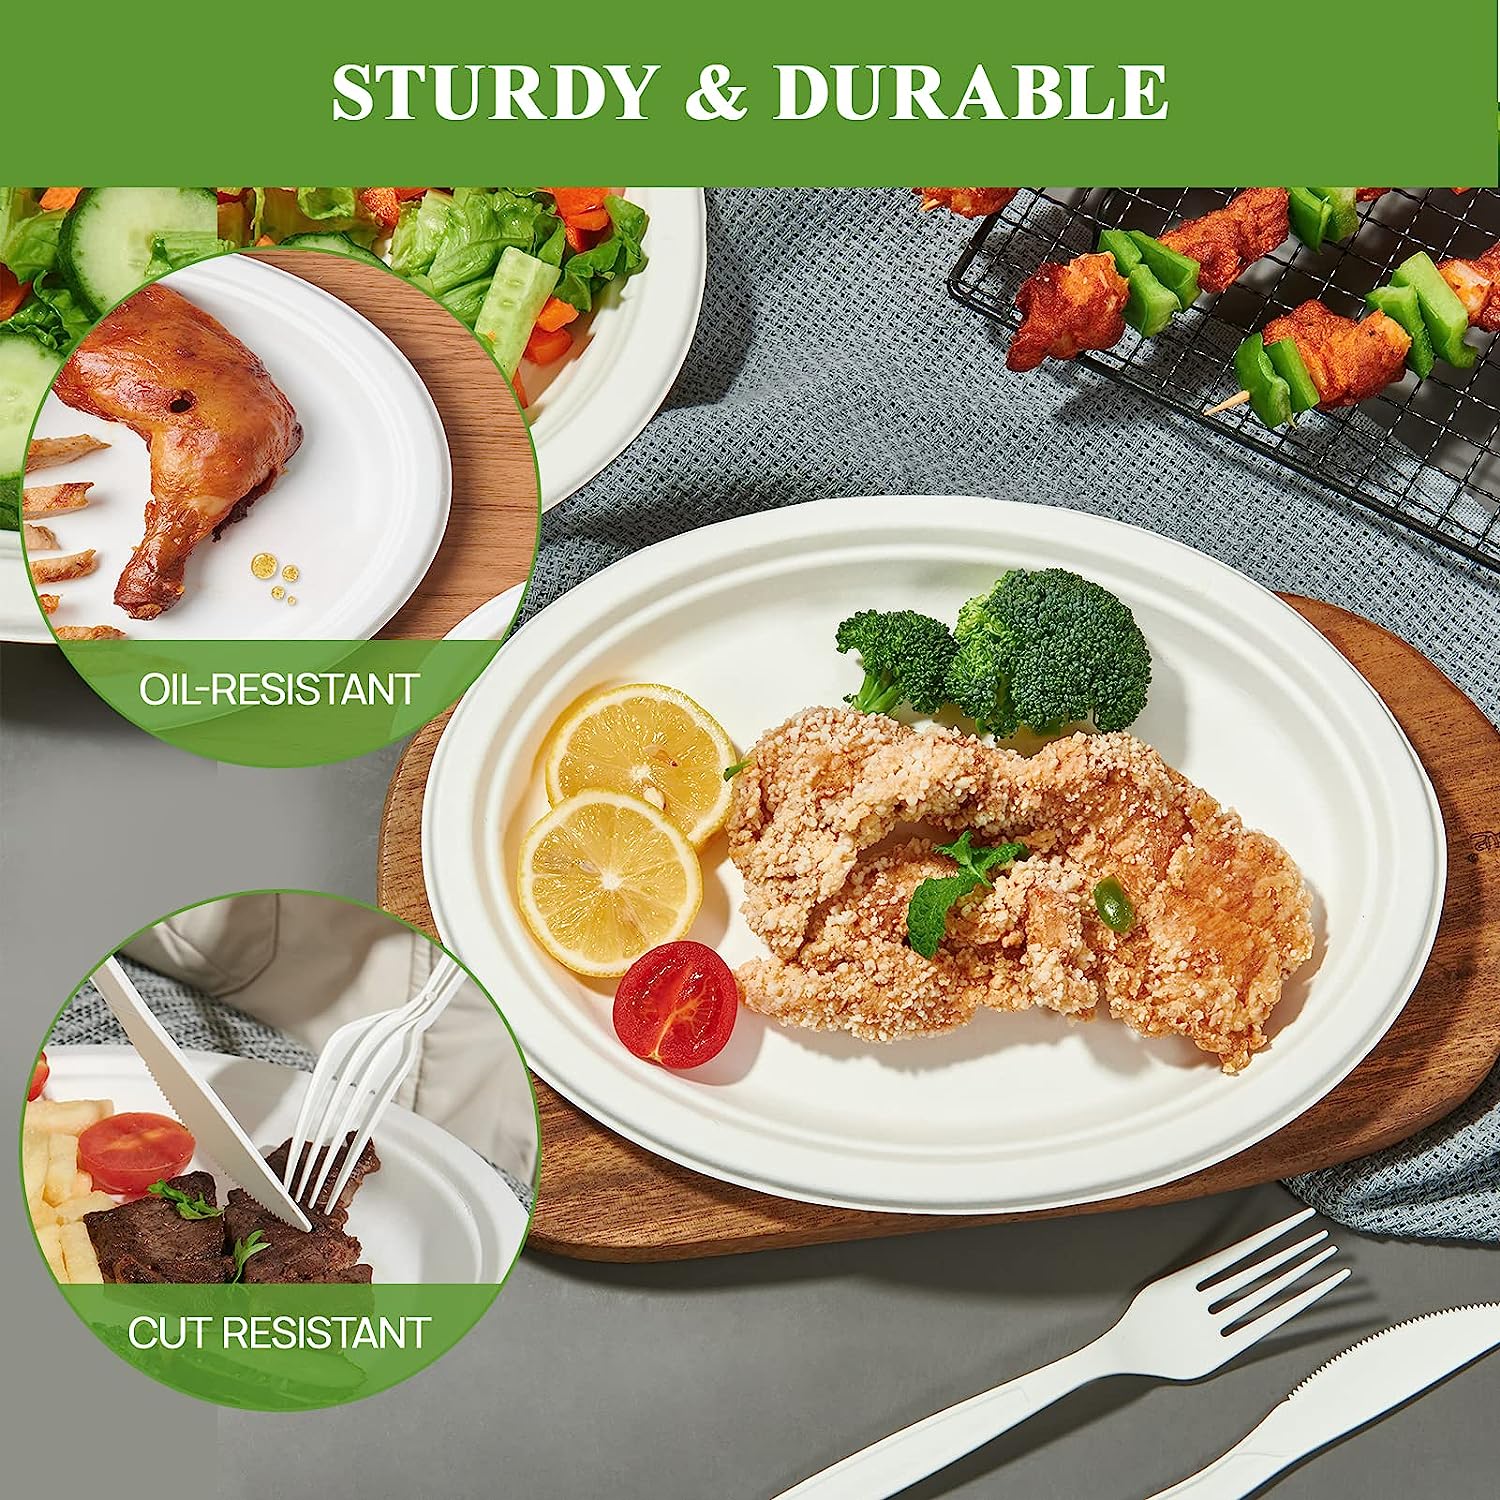 Disposable Paper Plates,12.5 Inch Oval Paper Plates,Super Strong